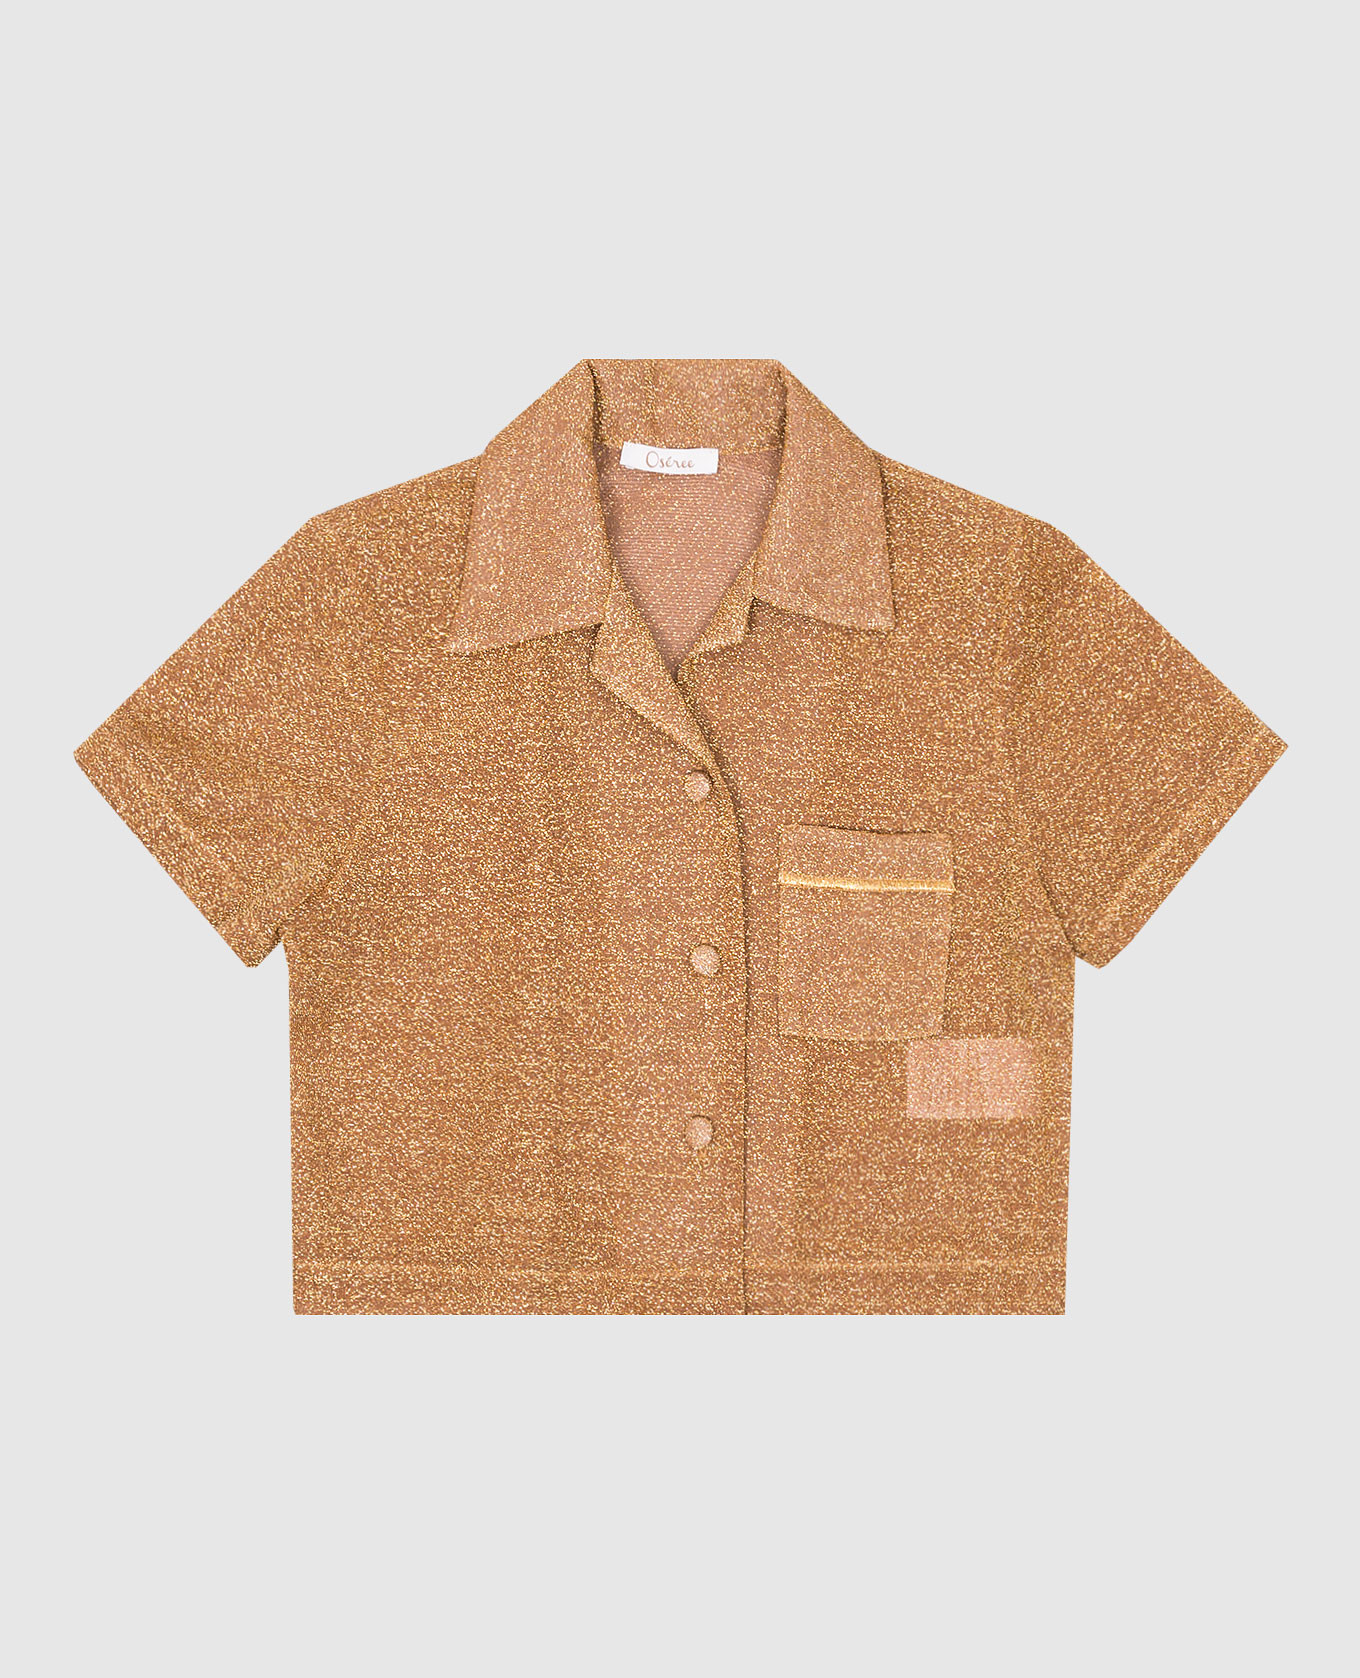 Children's brown shirt OSEMINI LUMIERE BOWLING with lurex